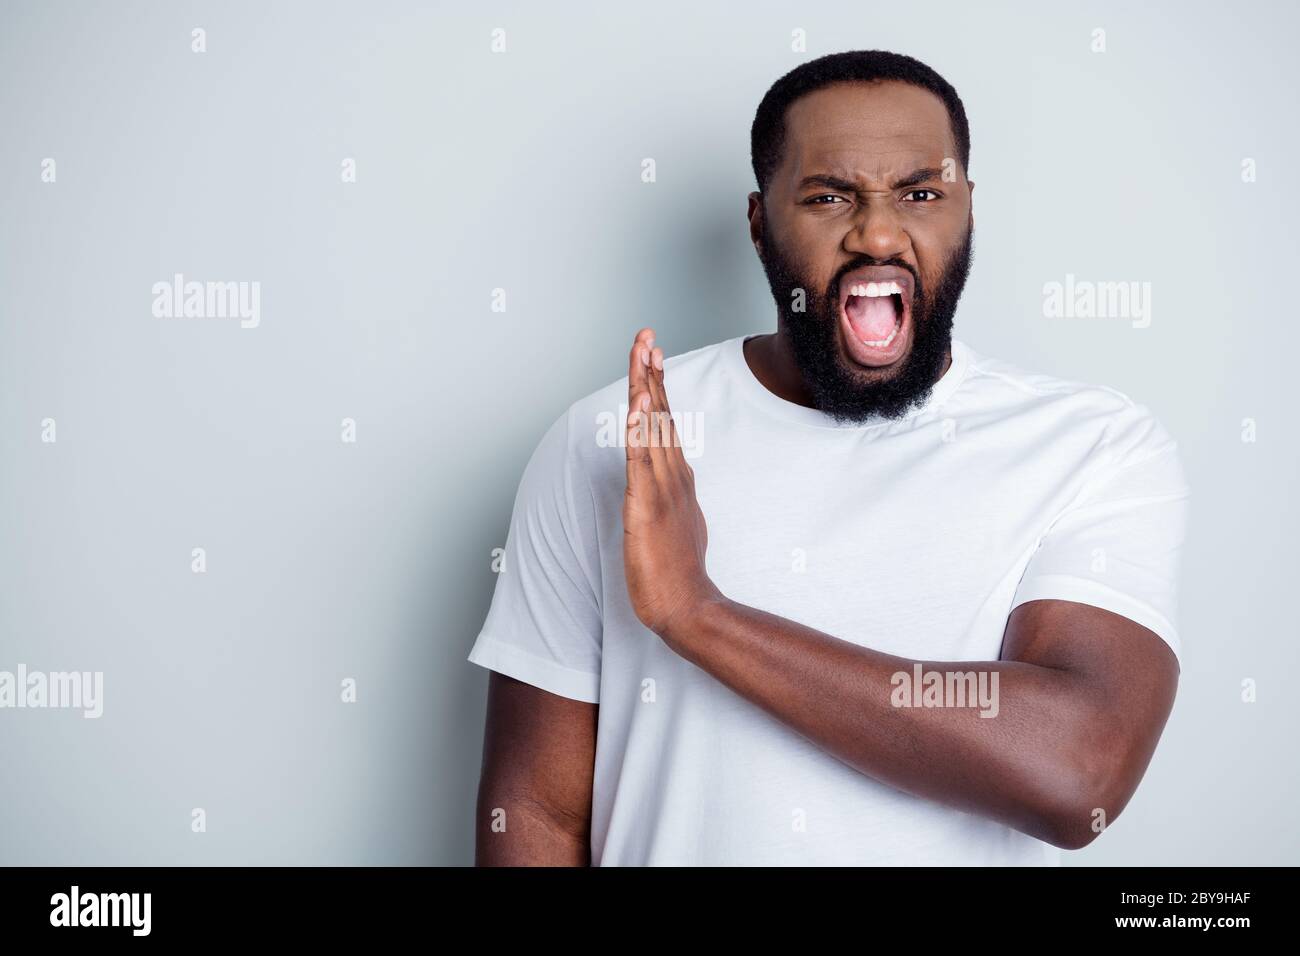 Photo of crazy disappointed yell dark skin african guy antiracism group member leader say no violence behavior black lawlessness raise arm empty space Stock Photo